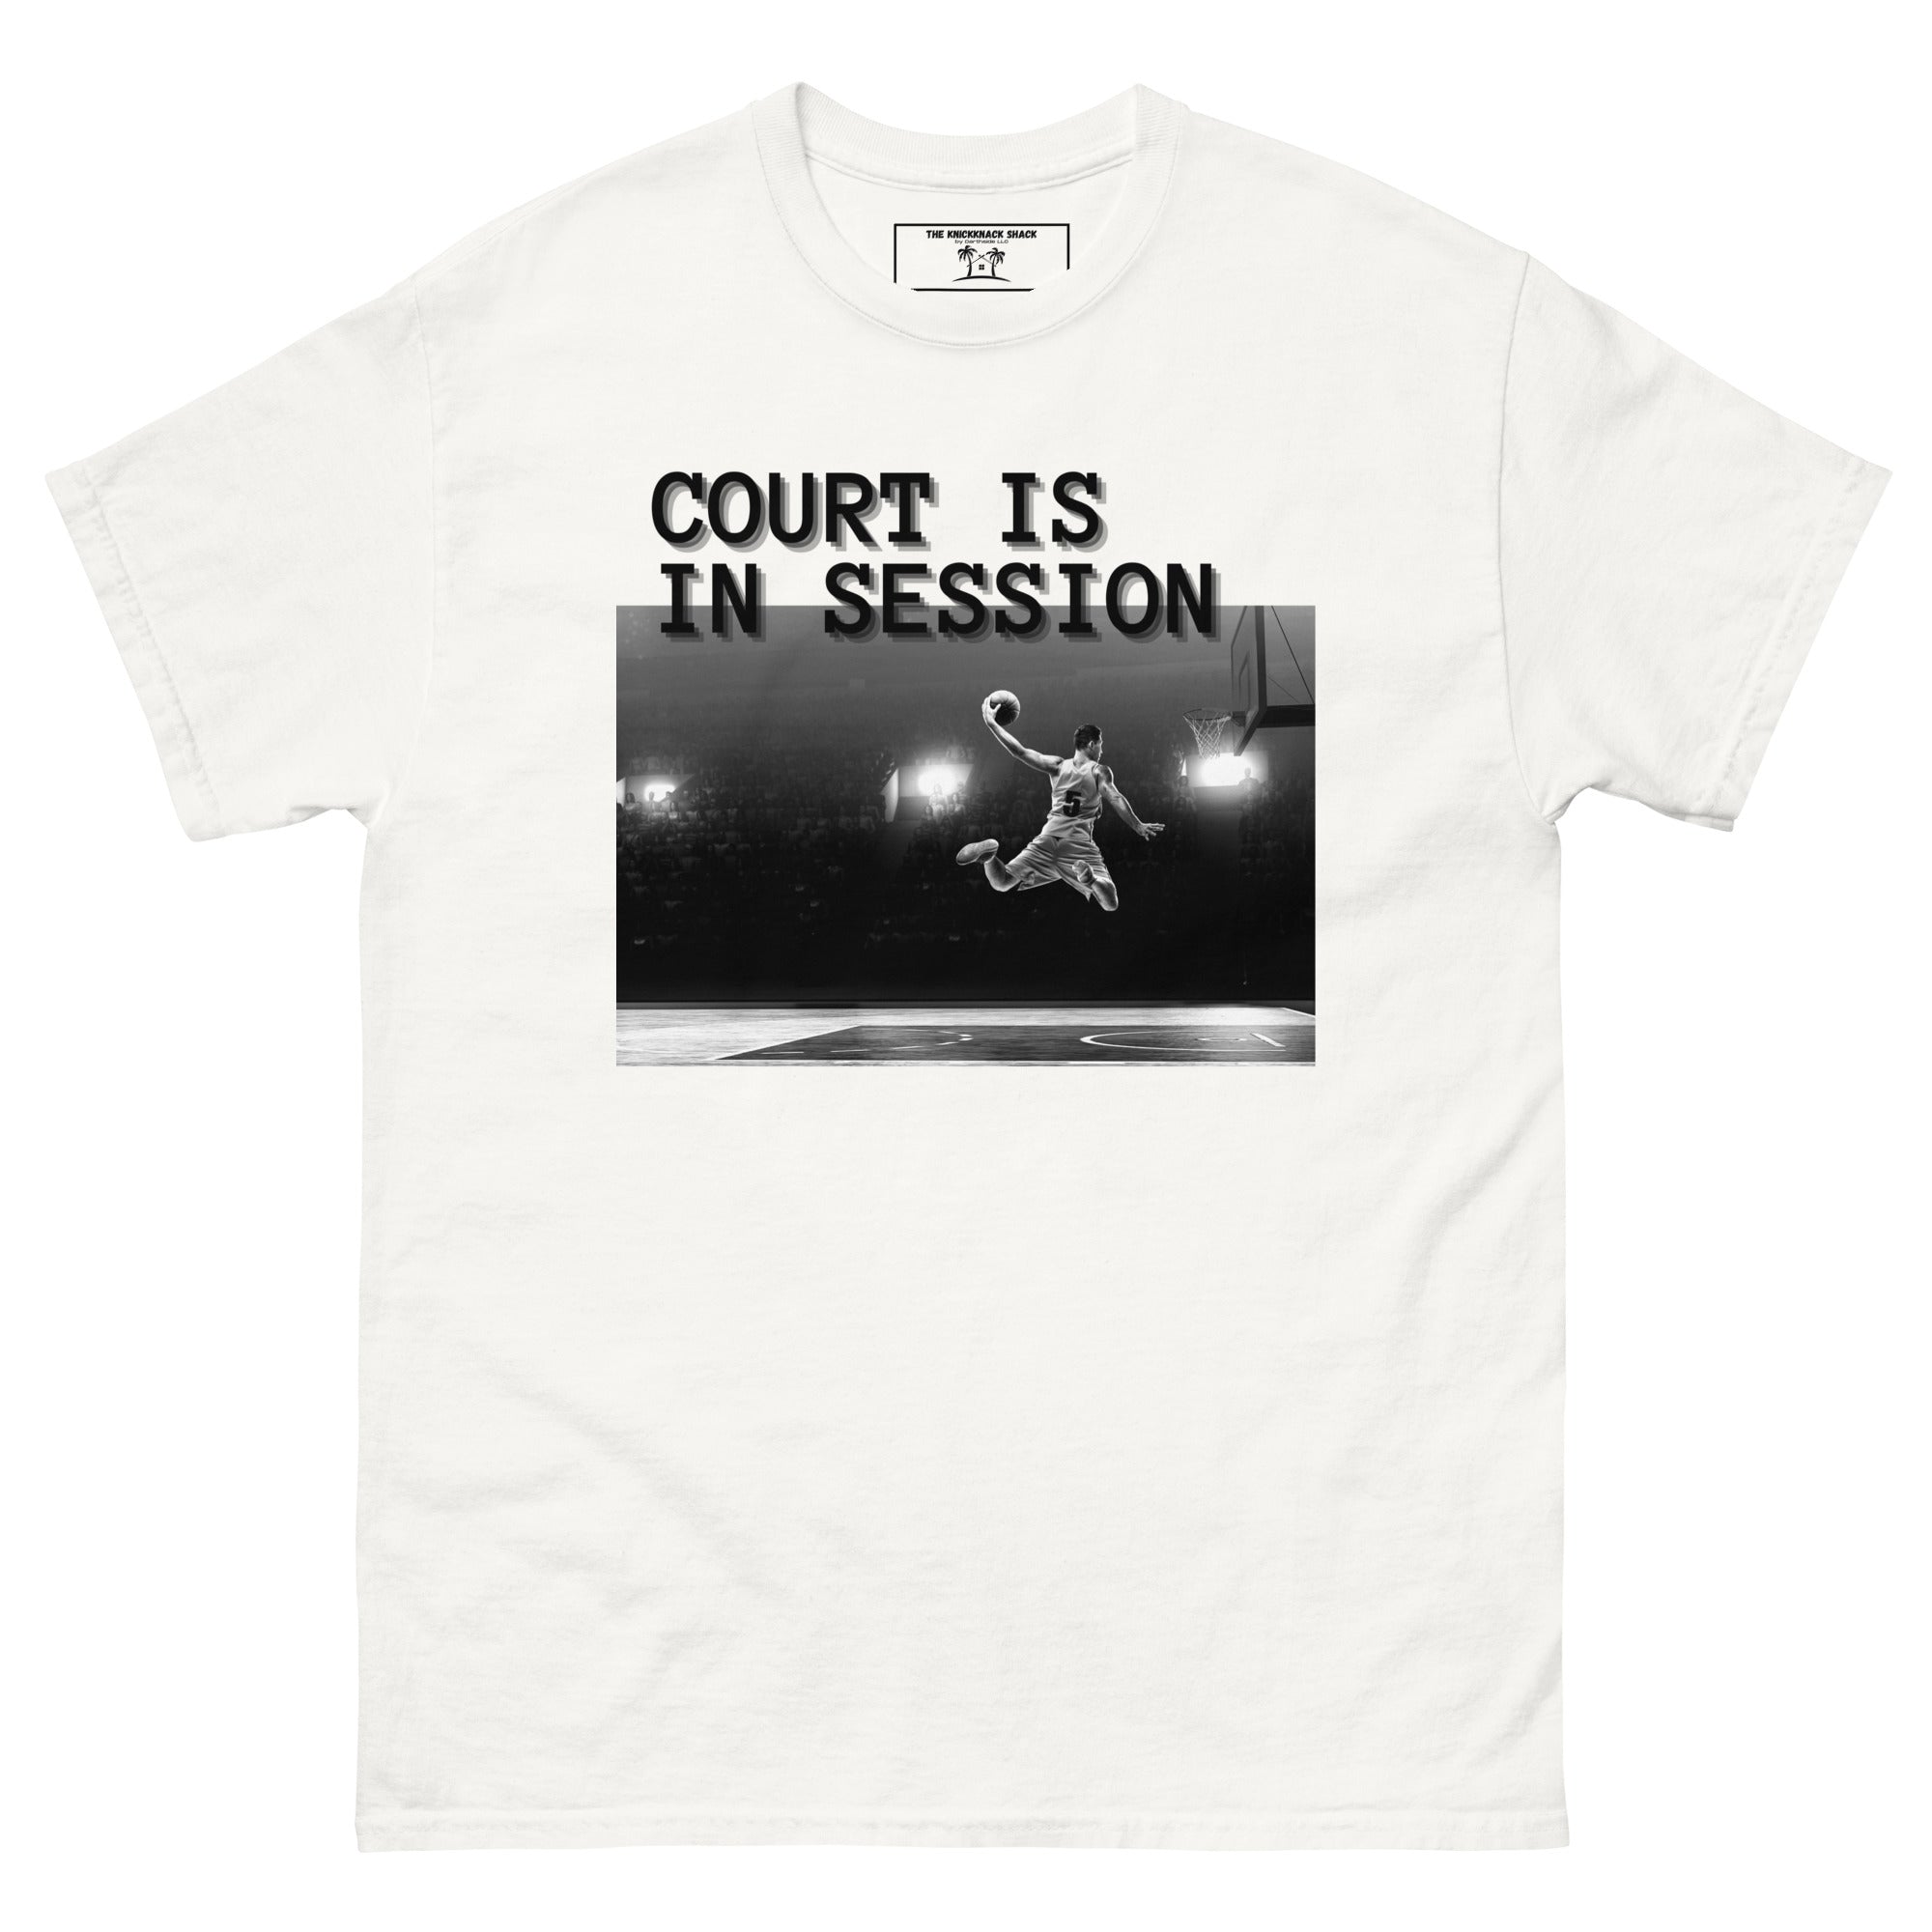 Classic Tee - Court Is In Session (Light Colors)